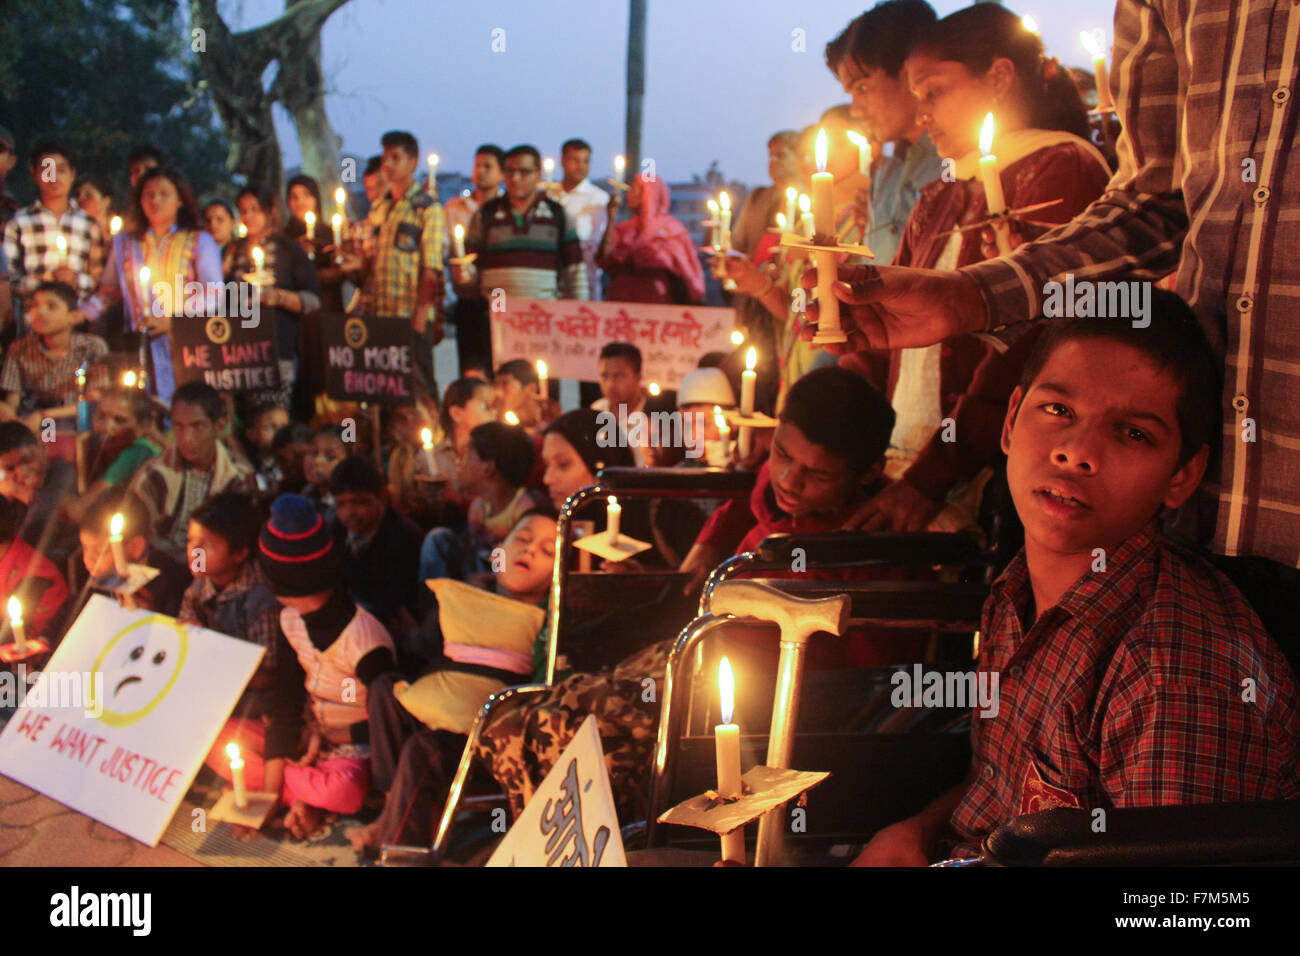 Bhopal, India. 1st Dec, 2015. Survivors' descendants with congenital disabilities light candles during a vigil marking the 31st anniversary of the gas tragedy in Bhopal, India, Dec. 1, 2015. More than 15,000 residents were killed by the gas leakage from the Union Carbide pesticide plant on the night of Dec. 2 to 3, 1984 in Bhopal, considered the world's worst industrial disaster. © Stringer/Xinhua/Alamy Live News Stock Photo